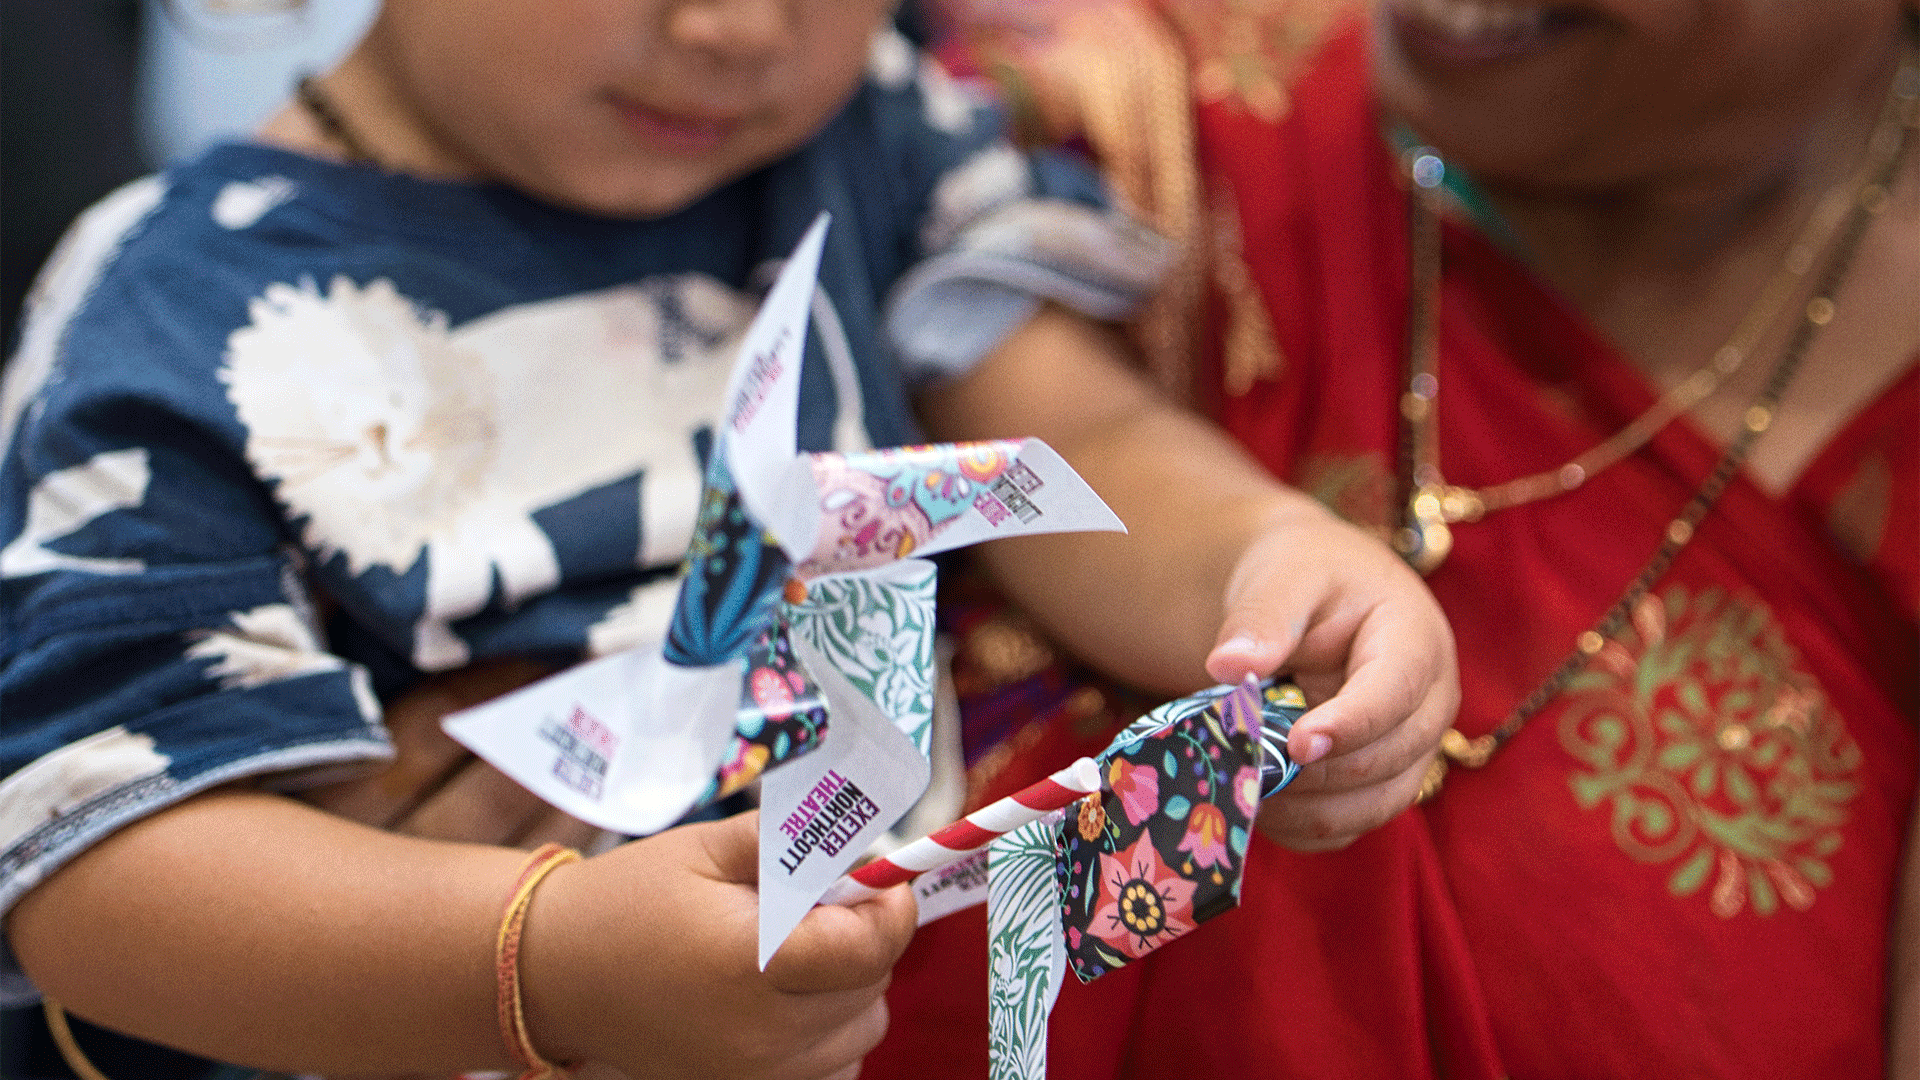 A young girl, held in arm by a woman in a red and gold dress, holds up a paper windmill featuring patterns from all of the communities involved in The Story of Us festival as well as the Exeter Northcott Theatre logo.